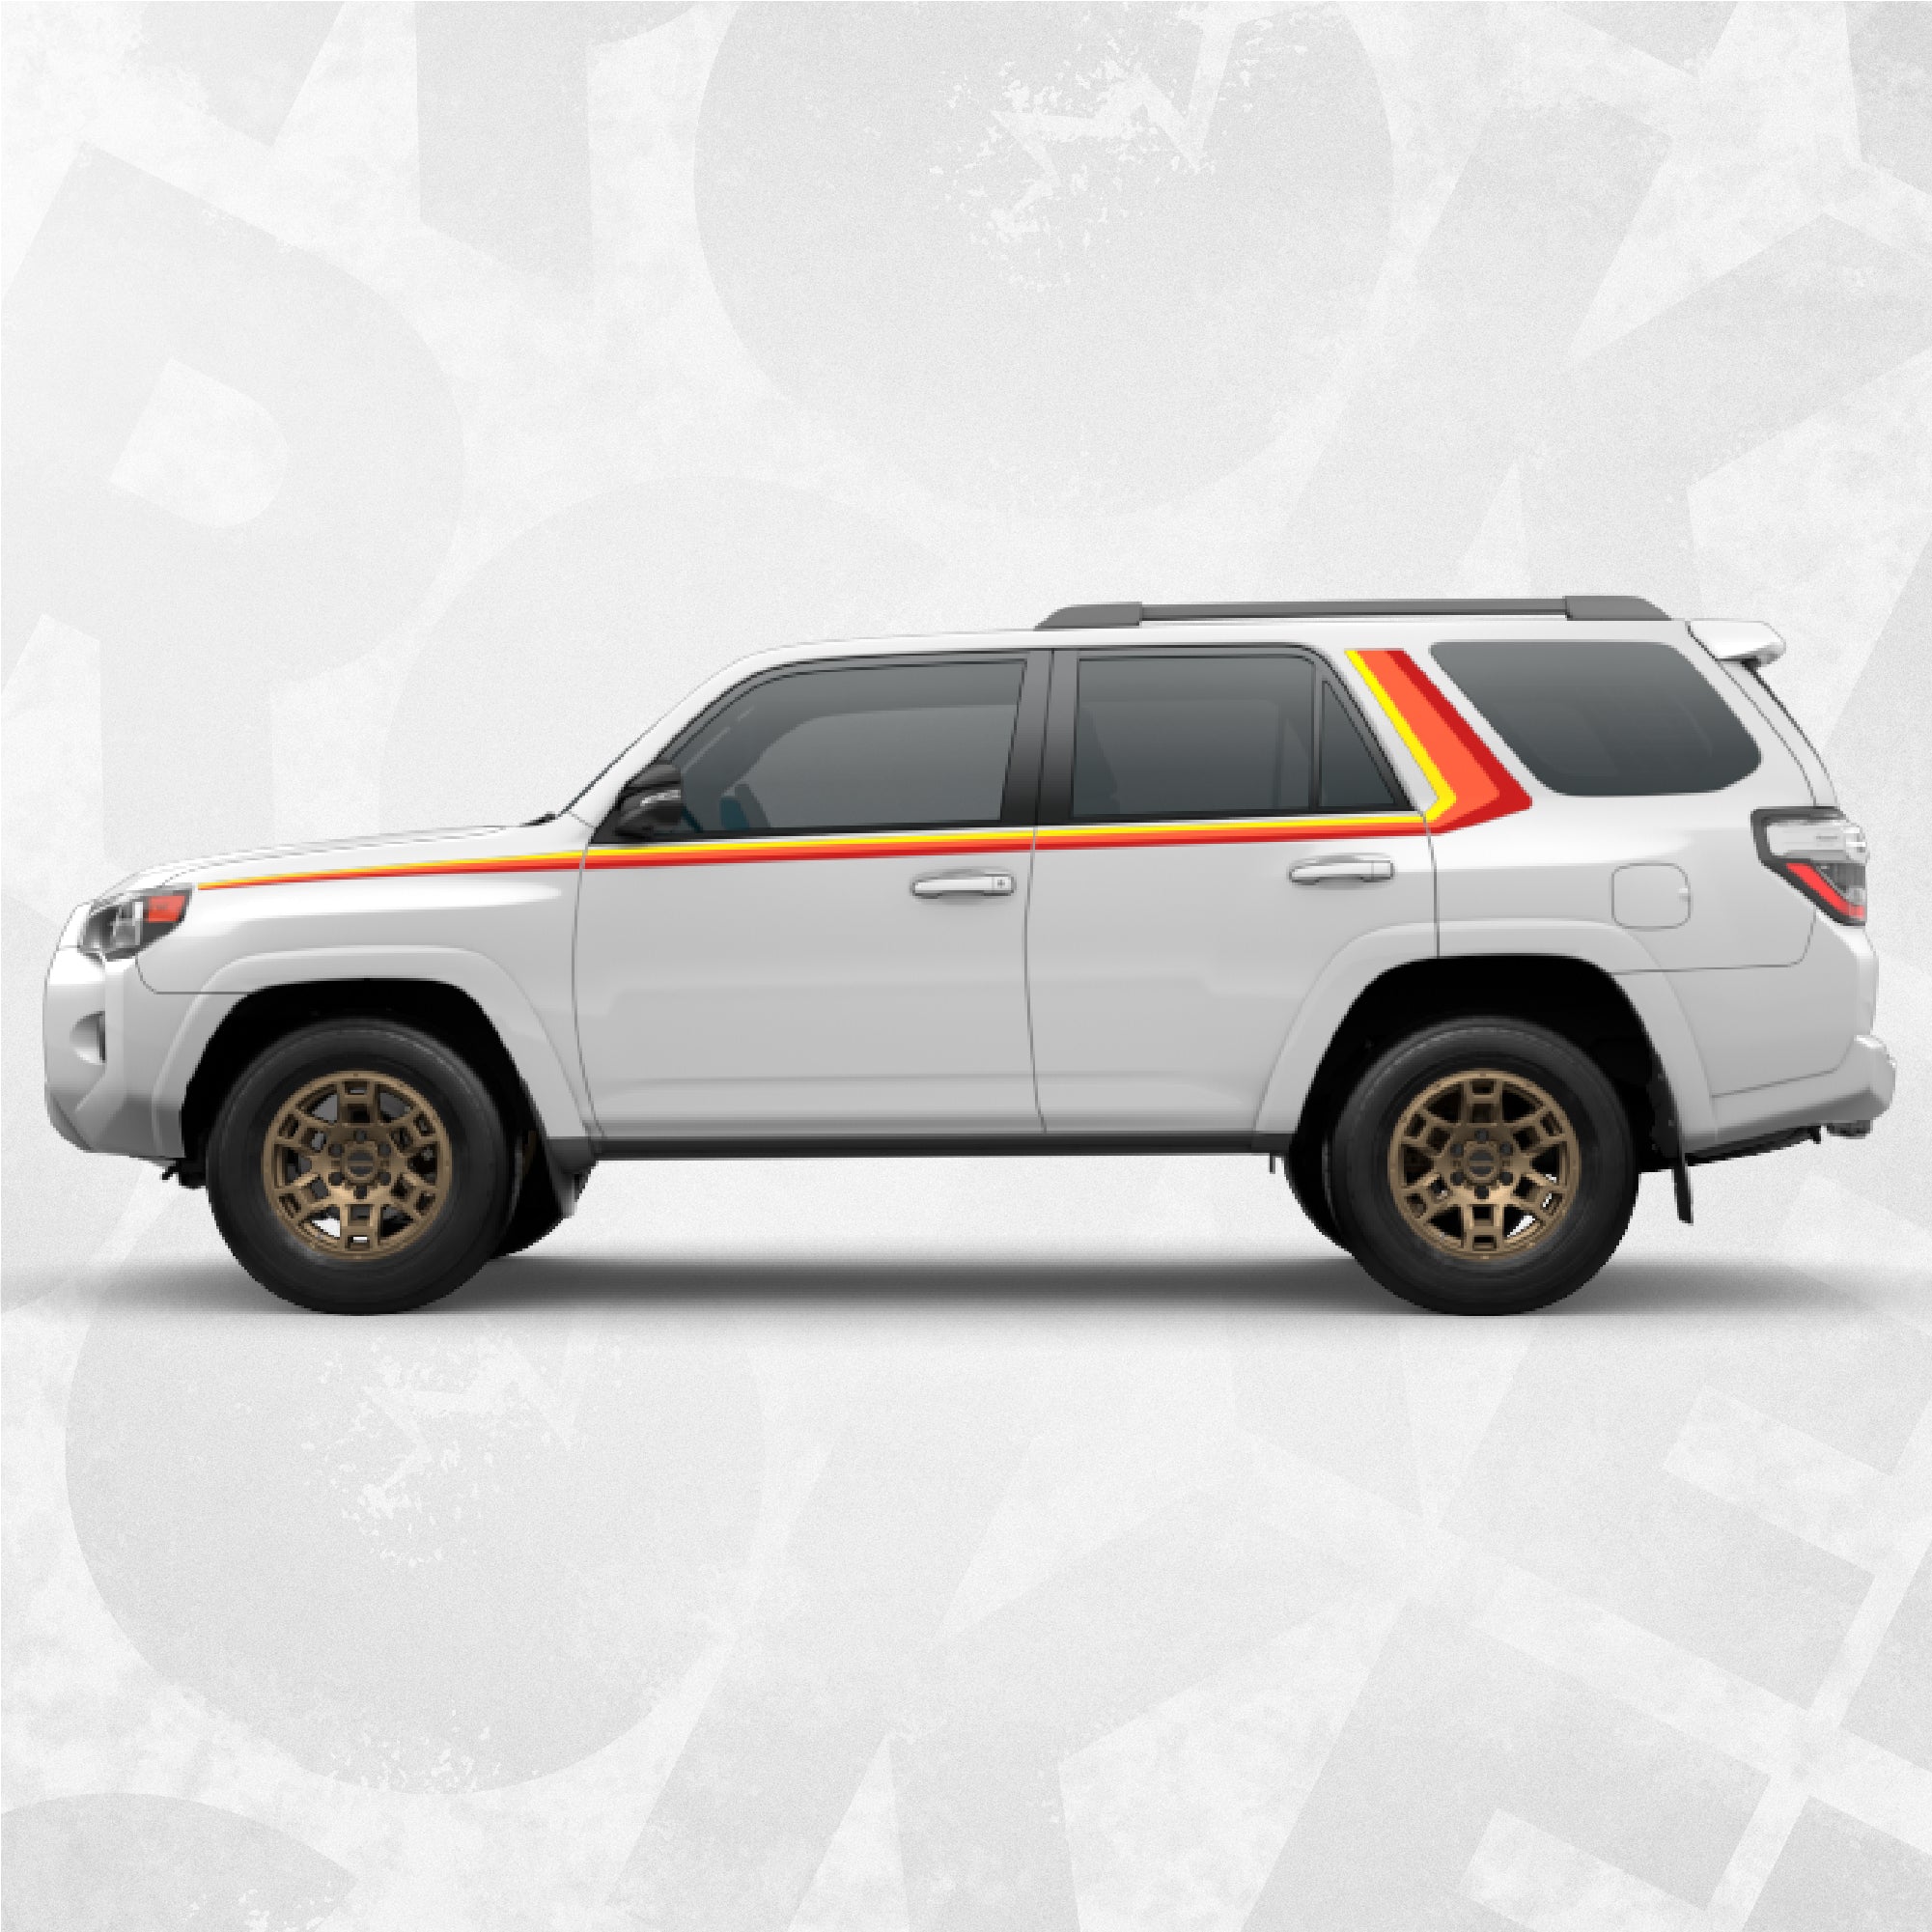 TOYOTA Decals - Toyota 4runner decals inspired by 40th anniversary